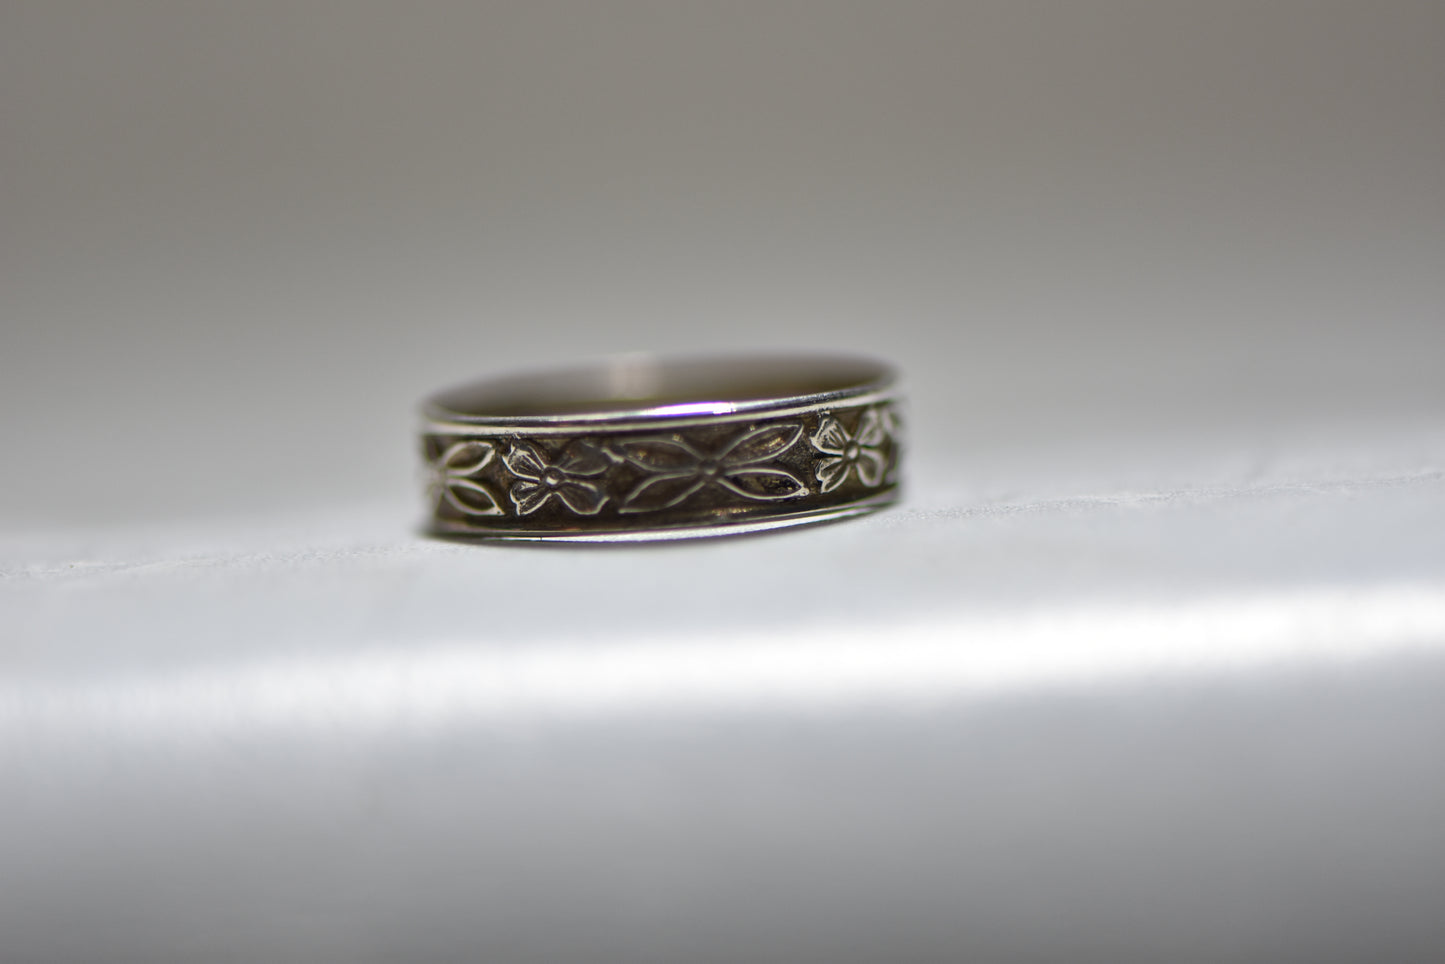 Floral Ring Stacker Pinky Slender Band sterling silver girls women Size 5.75